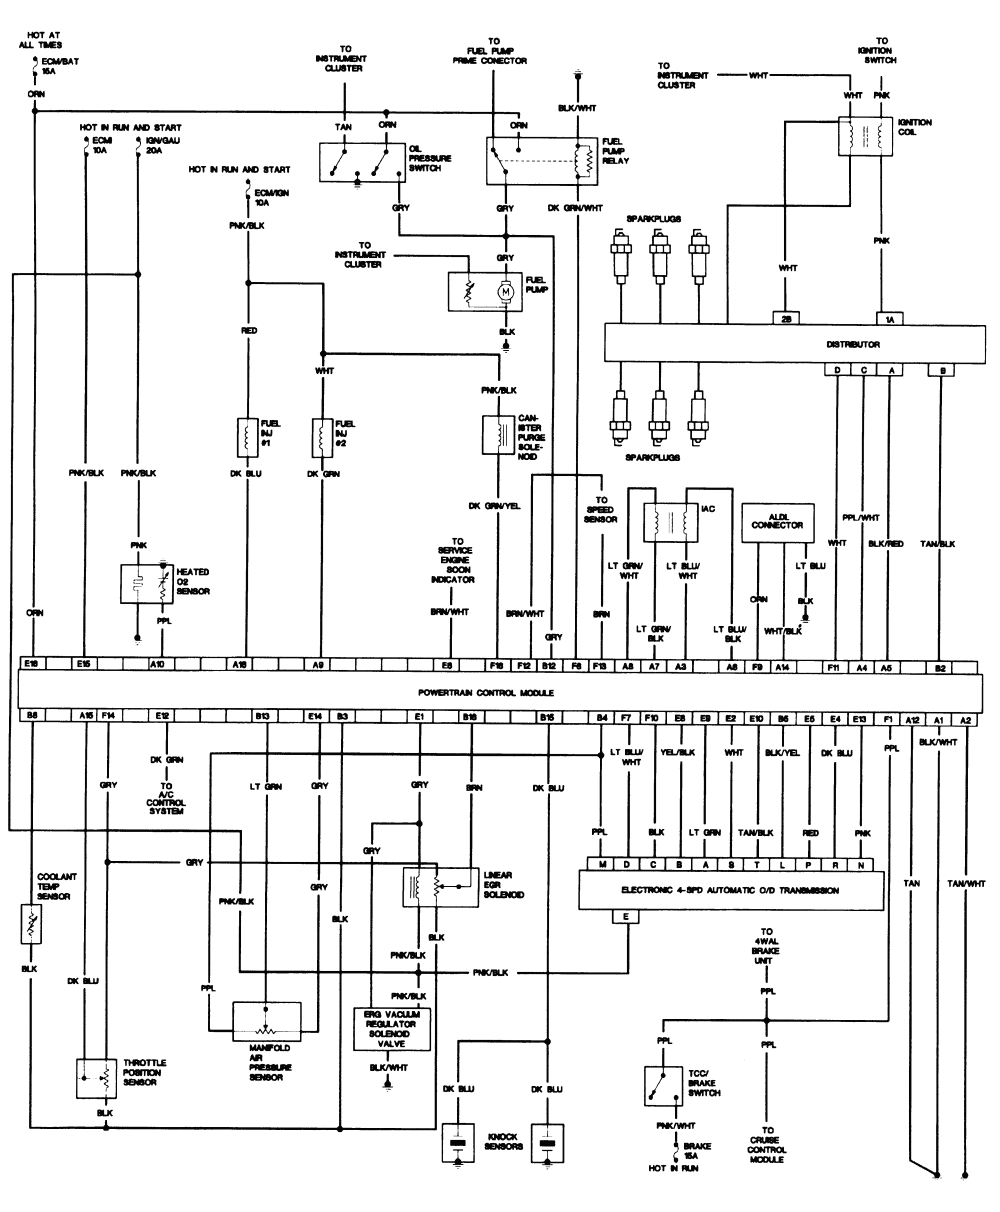 1992 chevy s10 wiring diagram